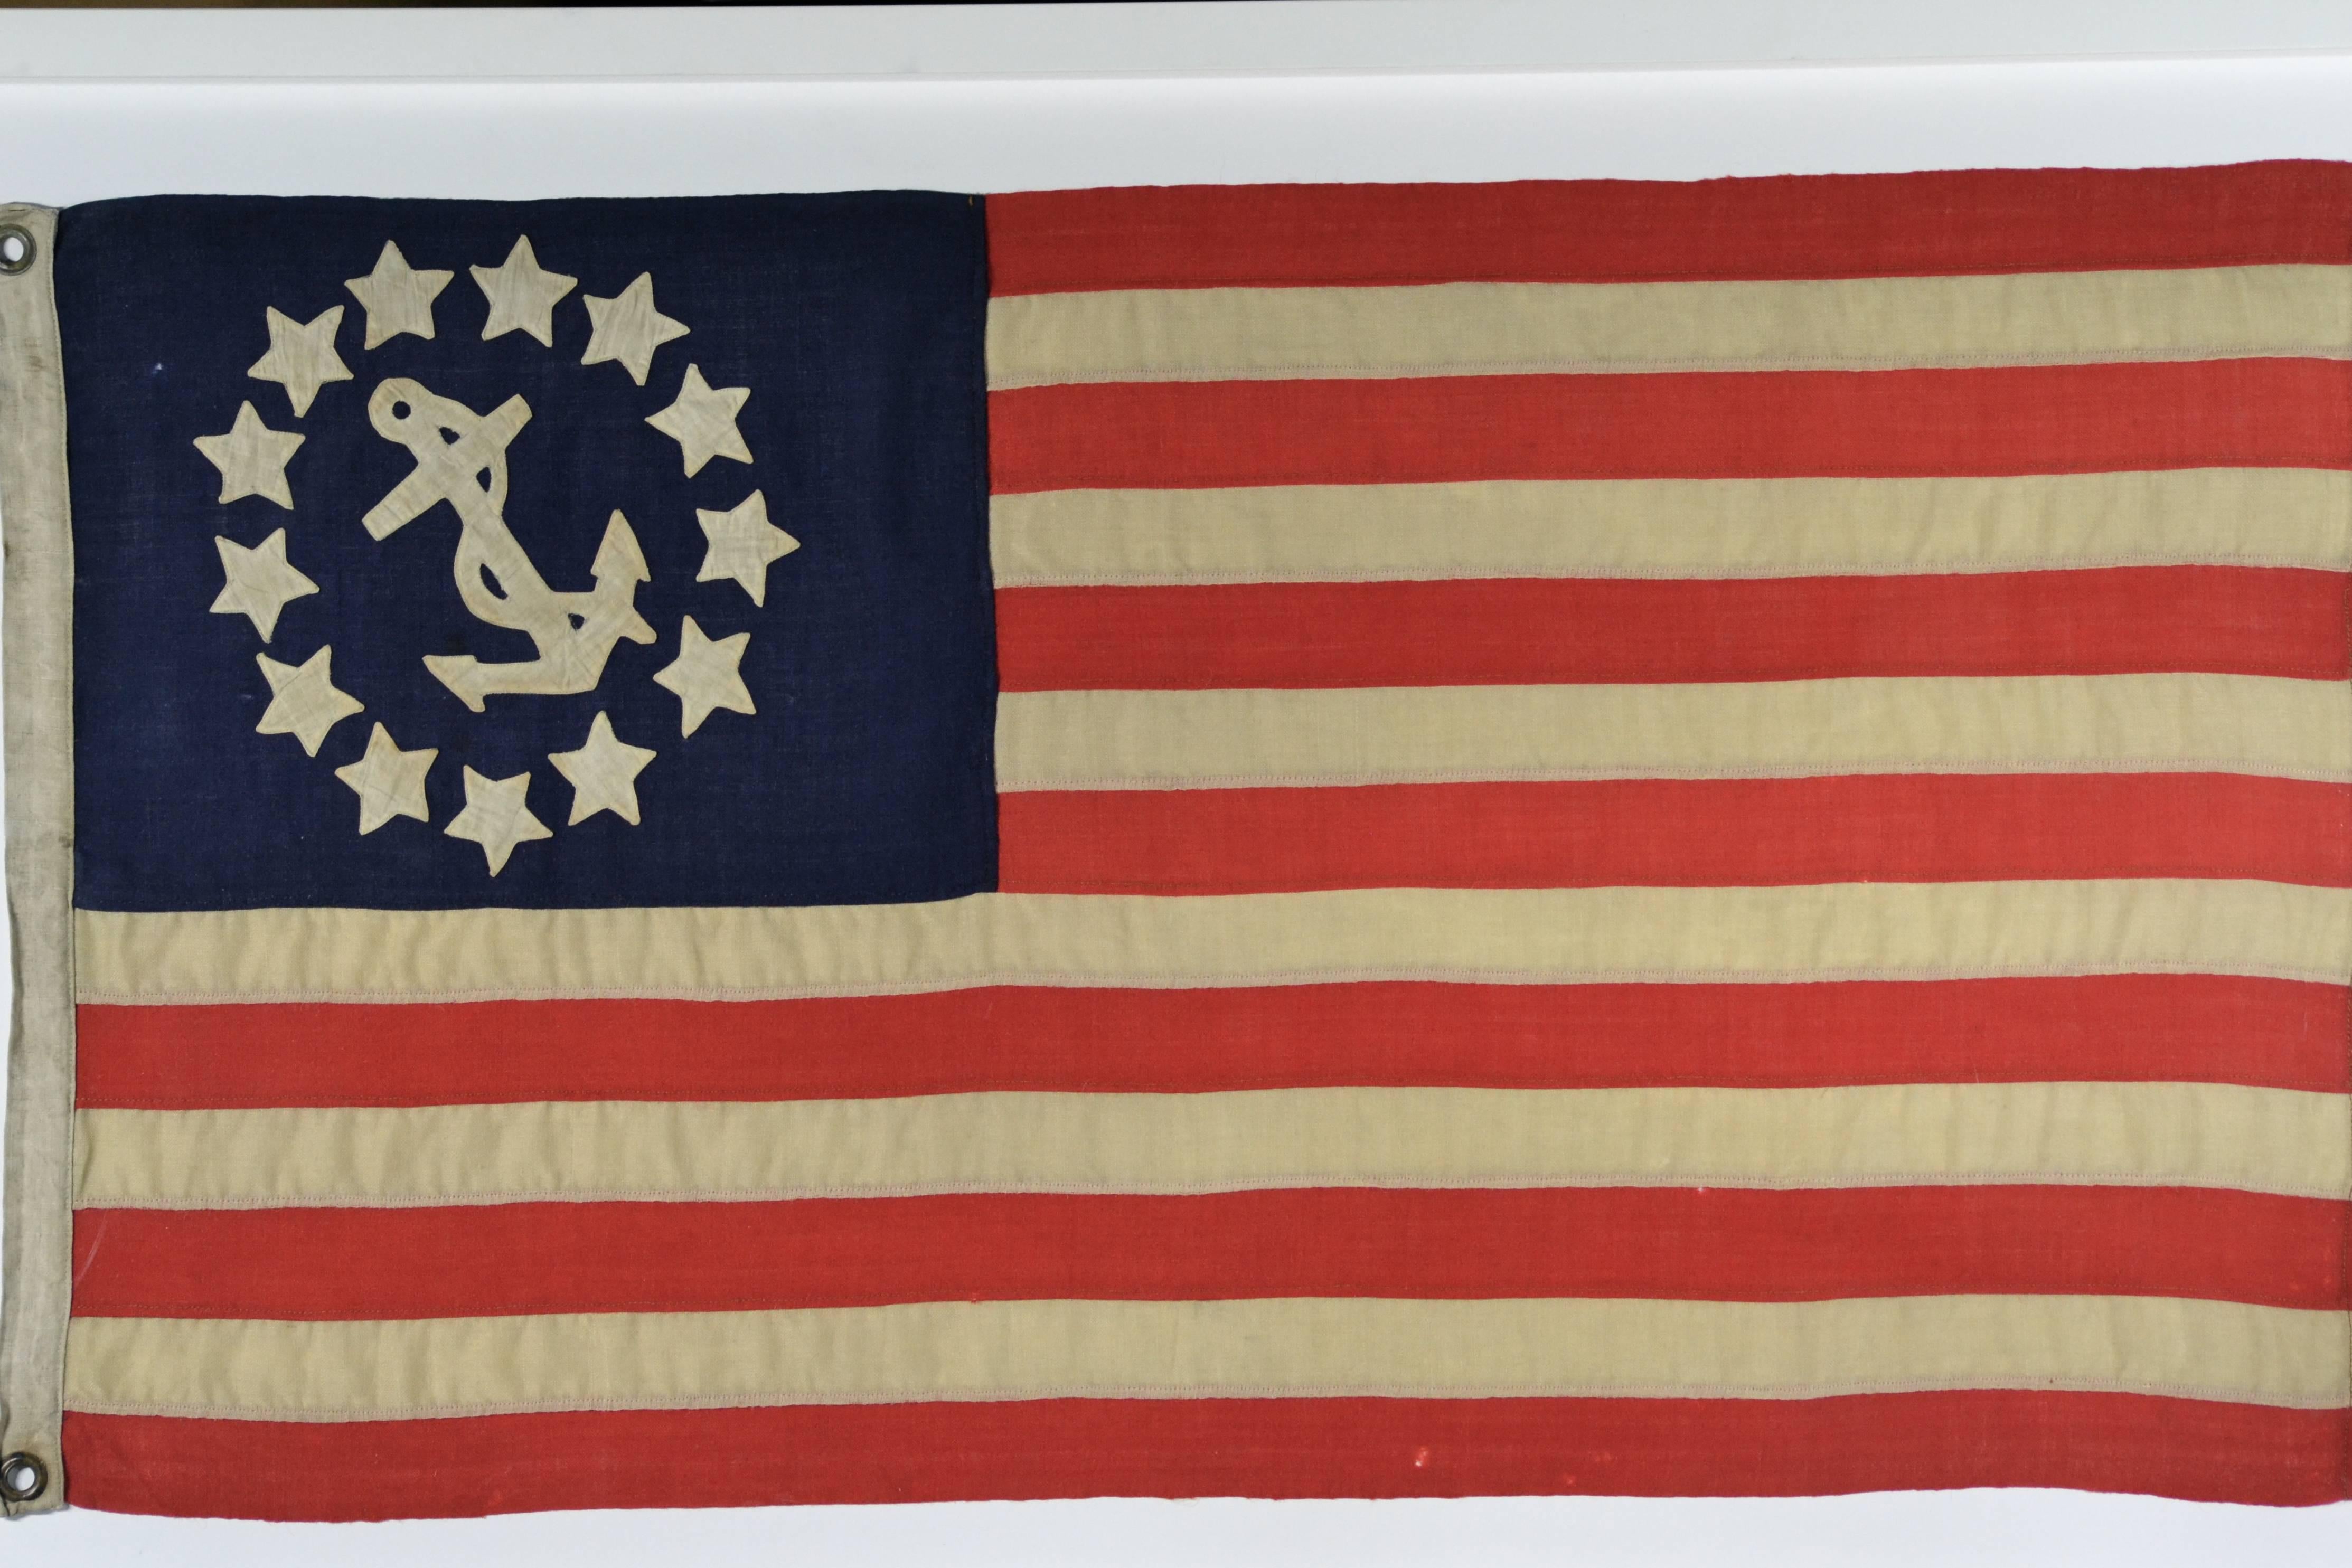 Antique boat yacht flag made of wool with hand-sewn stars. Hand cut and hand-sewn 13 linen stars and anchor. Individual cut and treadle sewn stripes. Linen hoist. Hand pressed brass grommets. Flag end is double single line treadle sewn. Flag size is